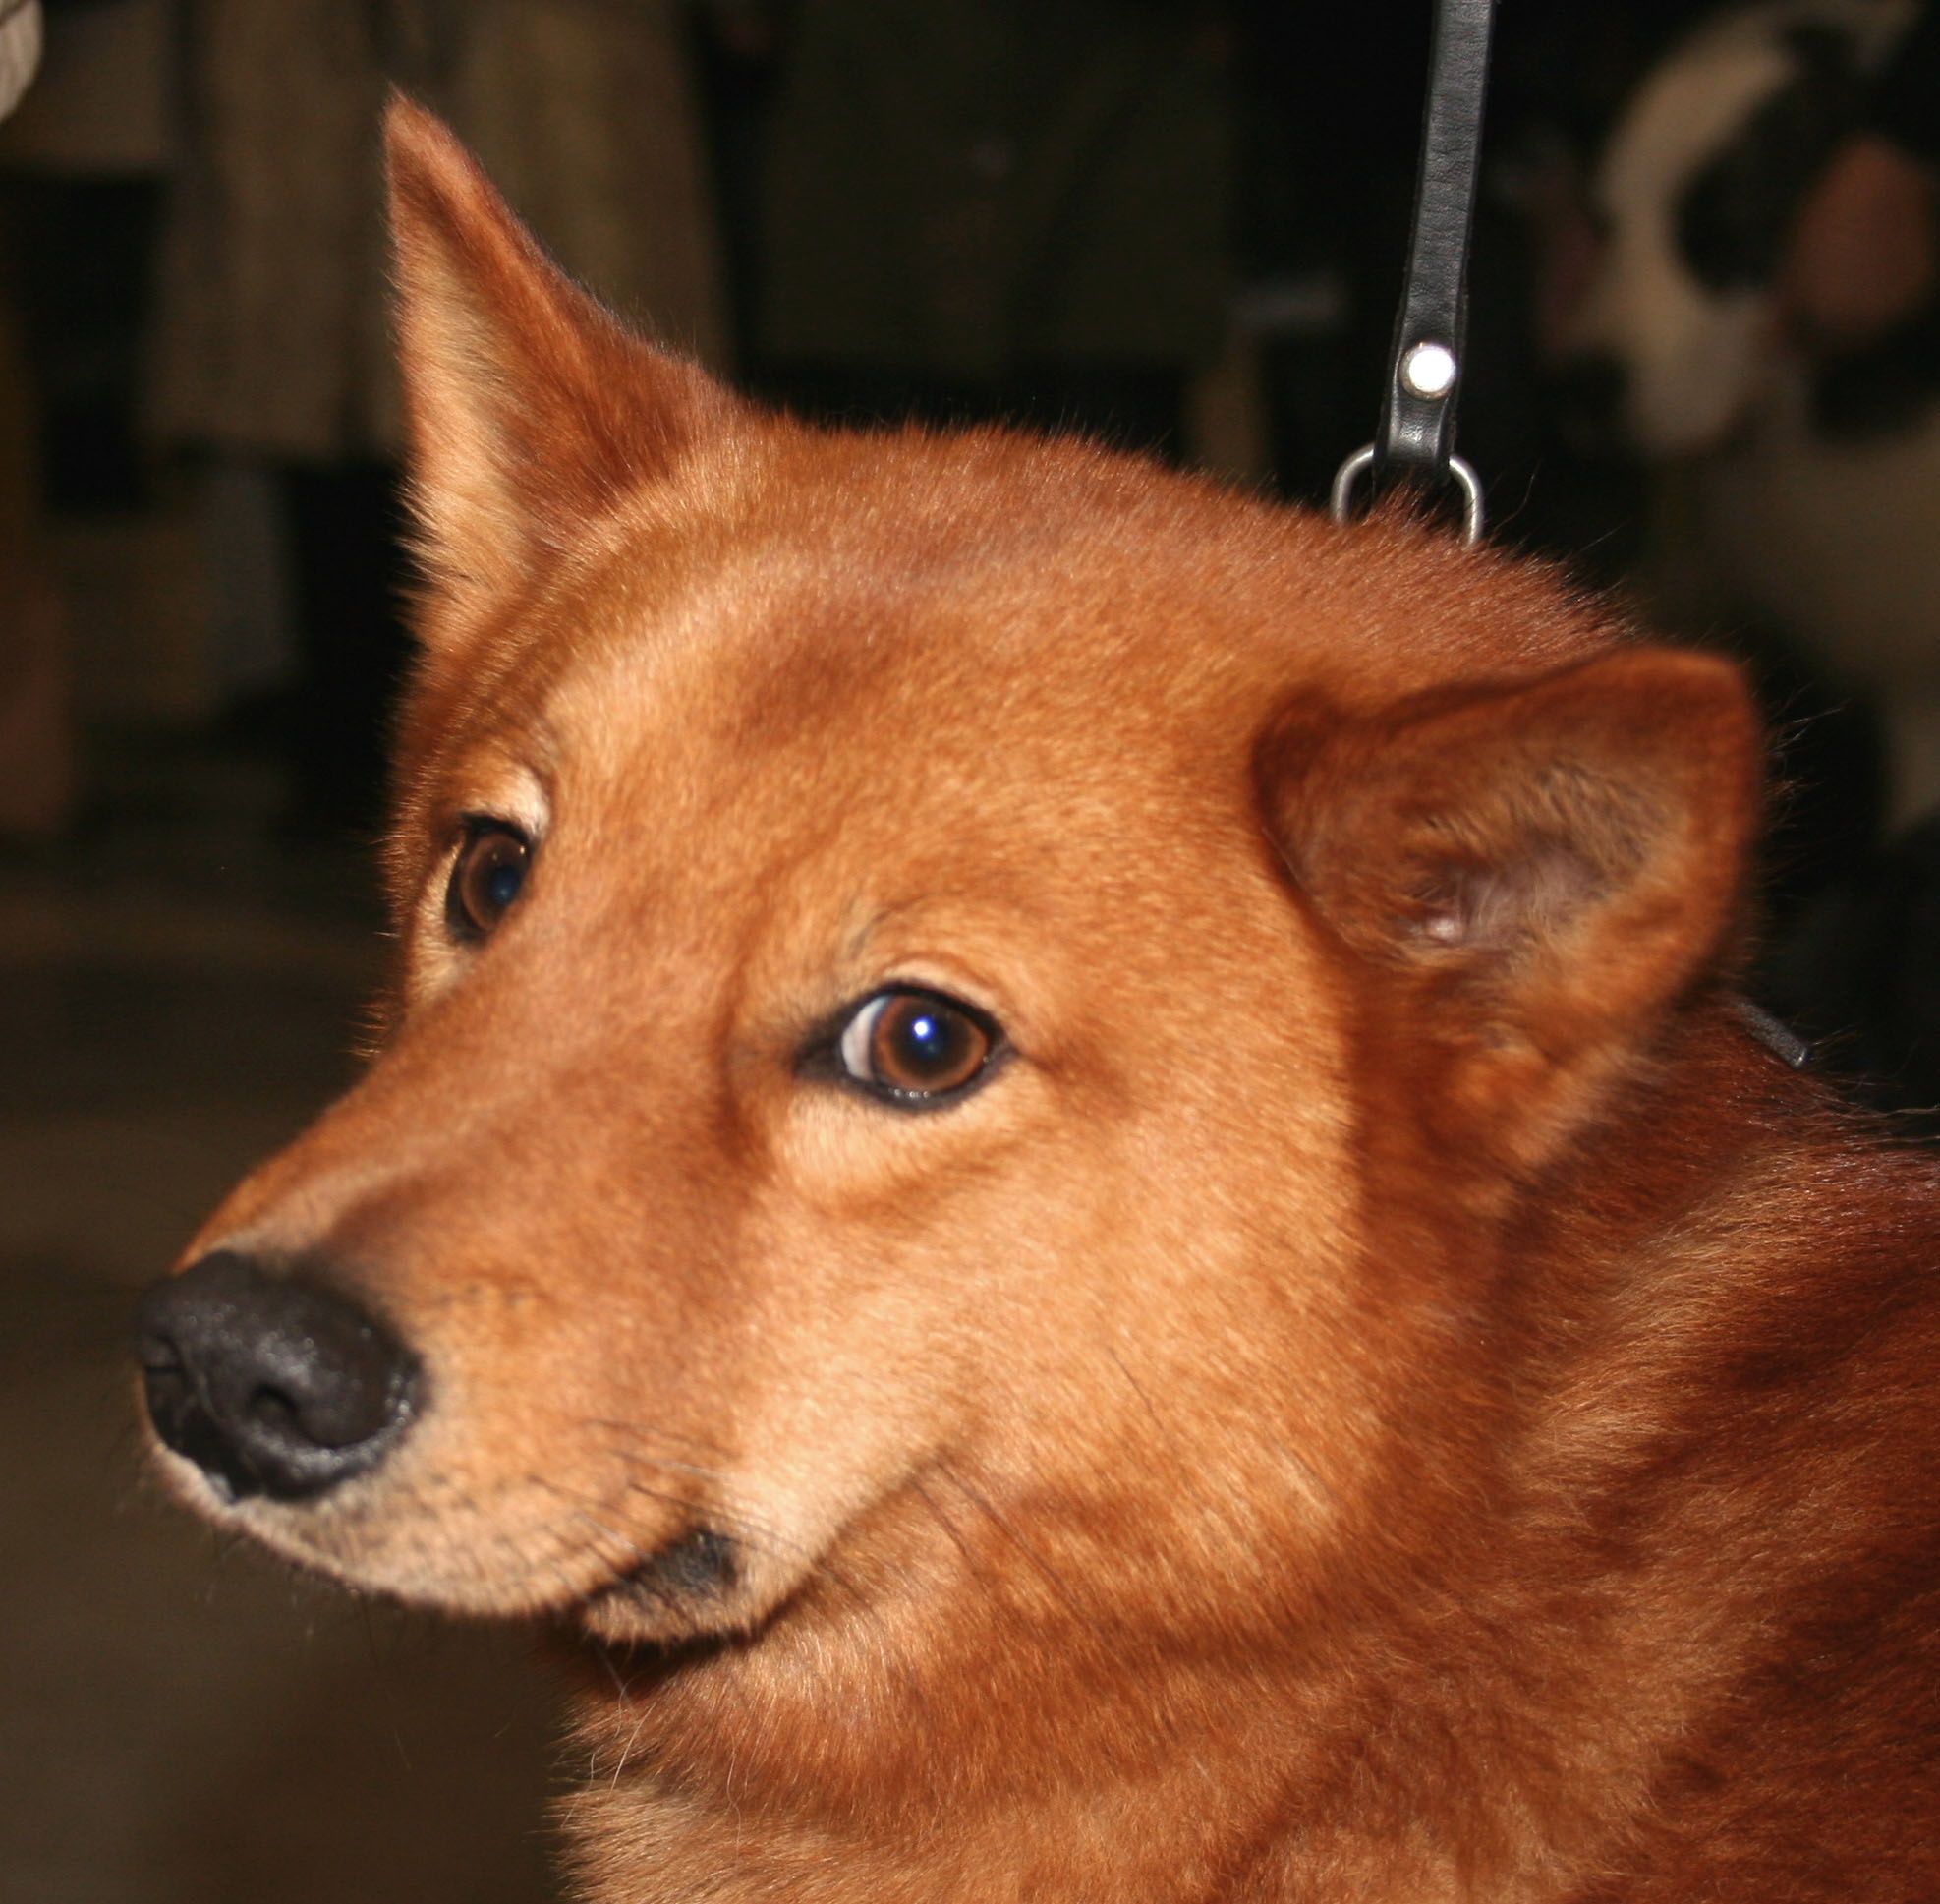 Finnish Spitz Information Dog Breeds at thepetowners